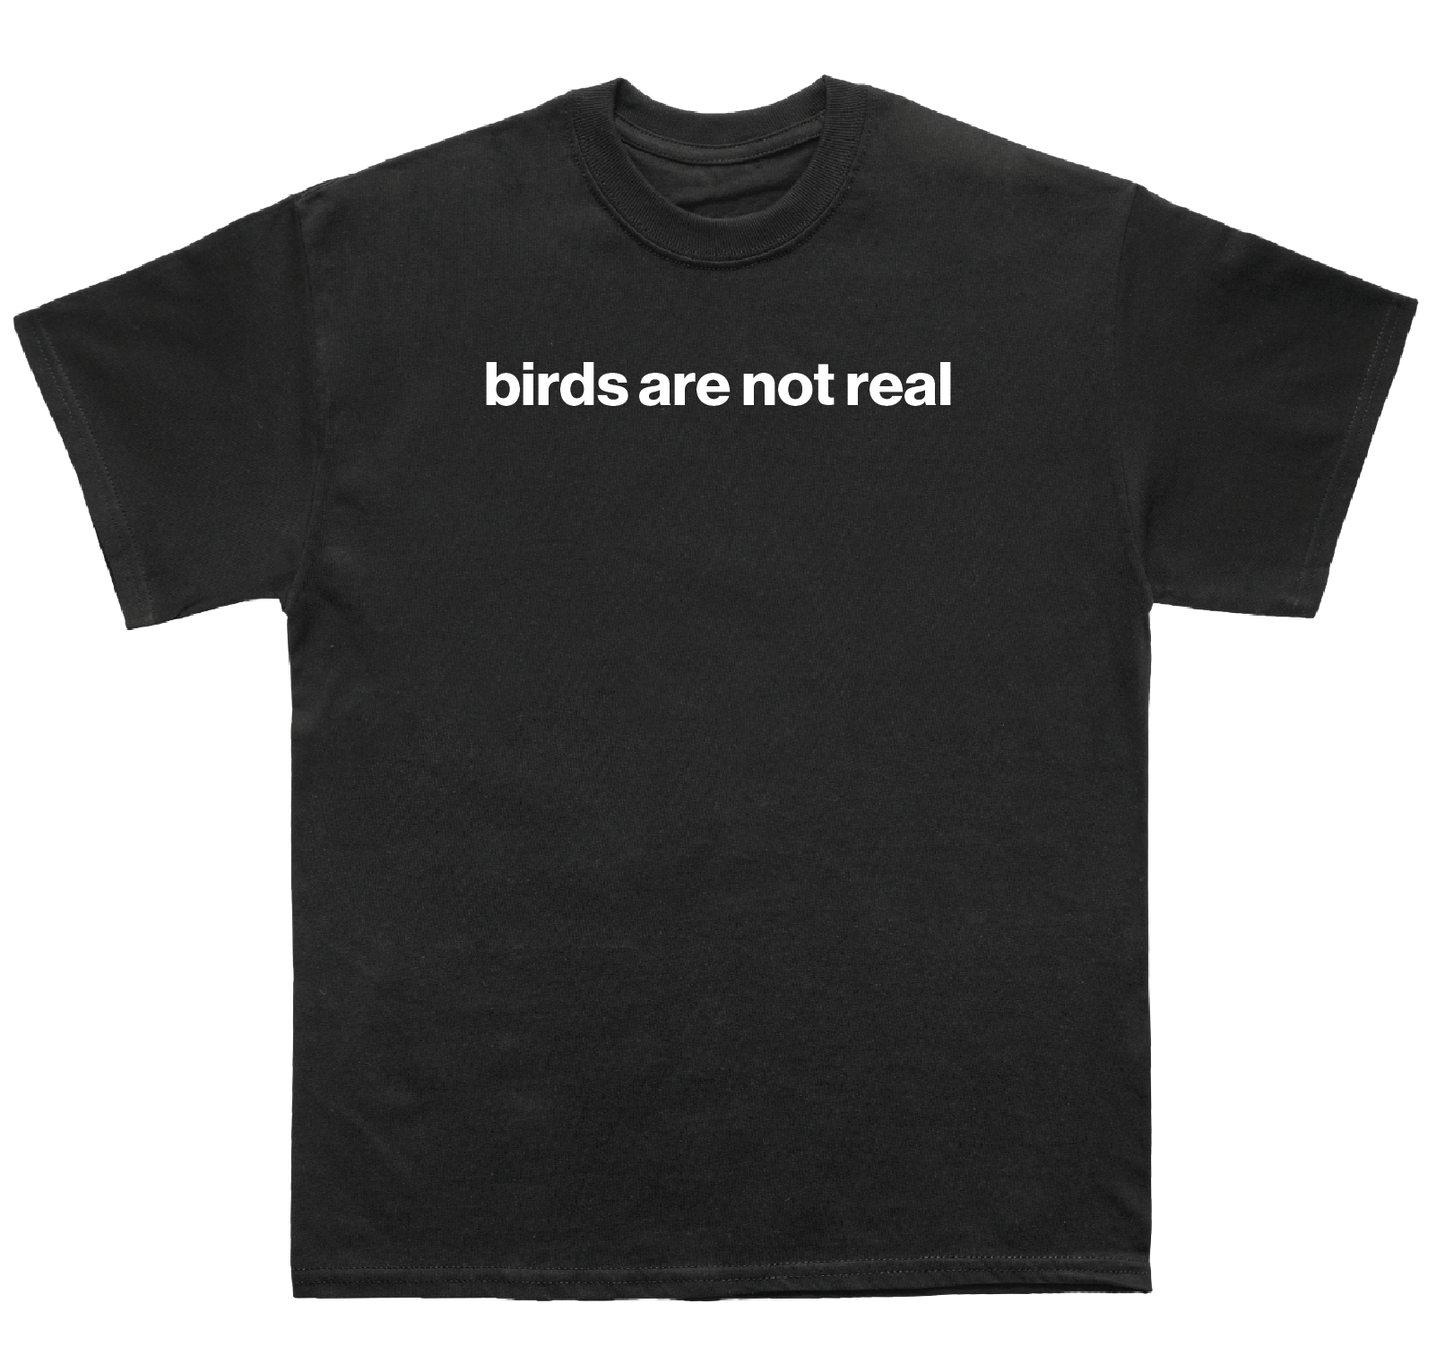 birds are not real shirt